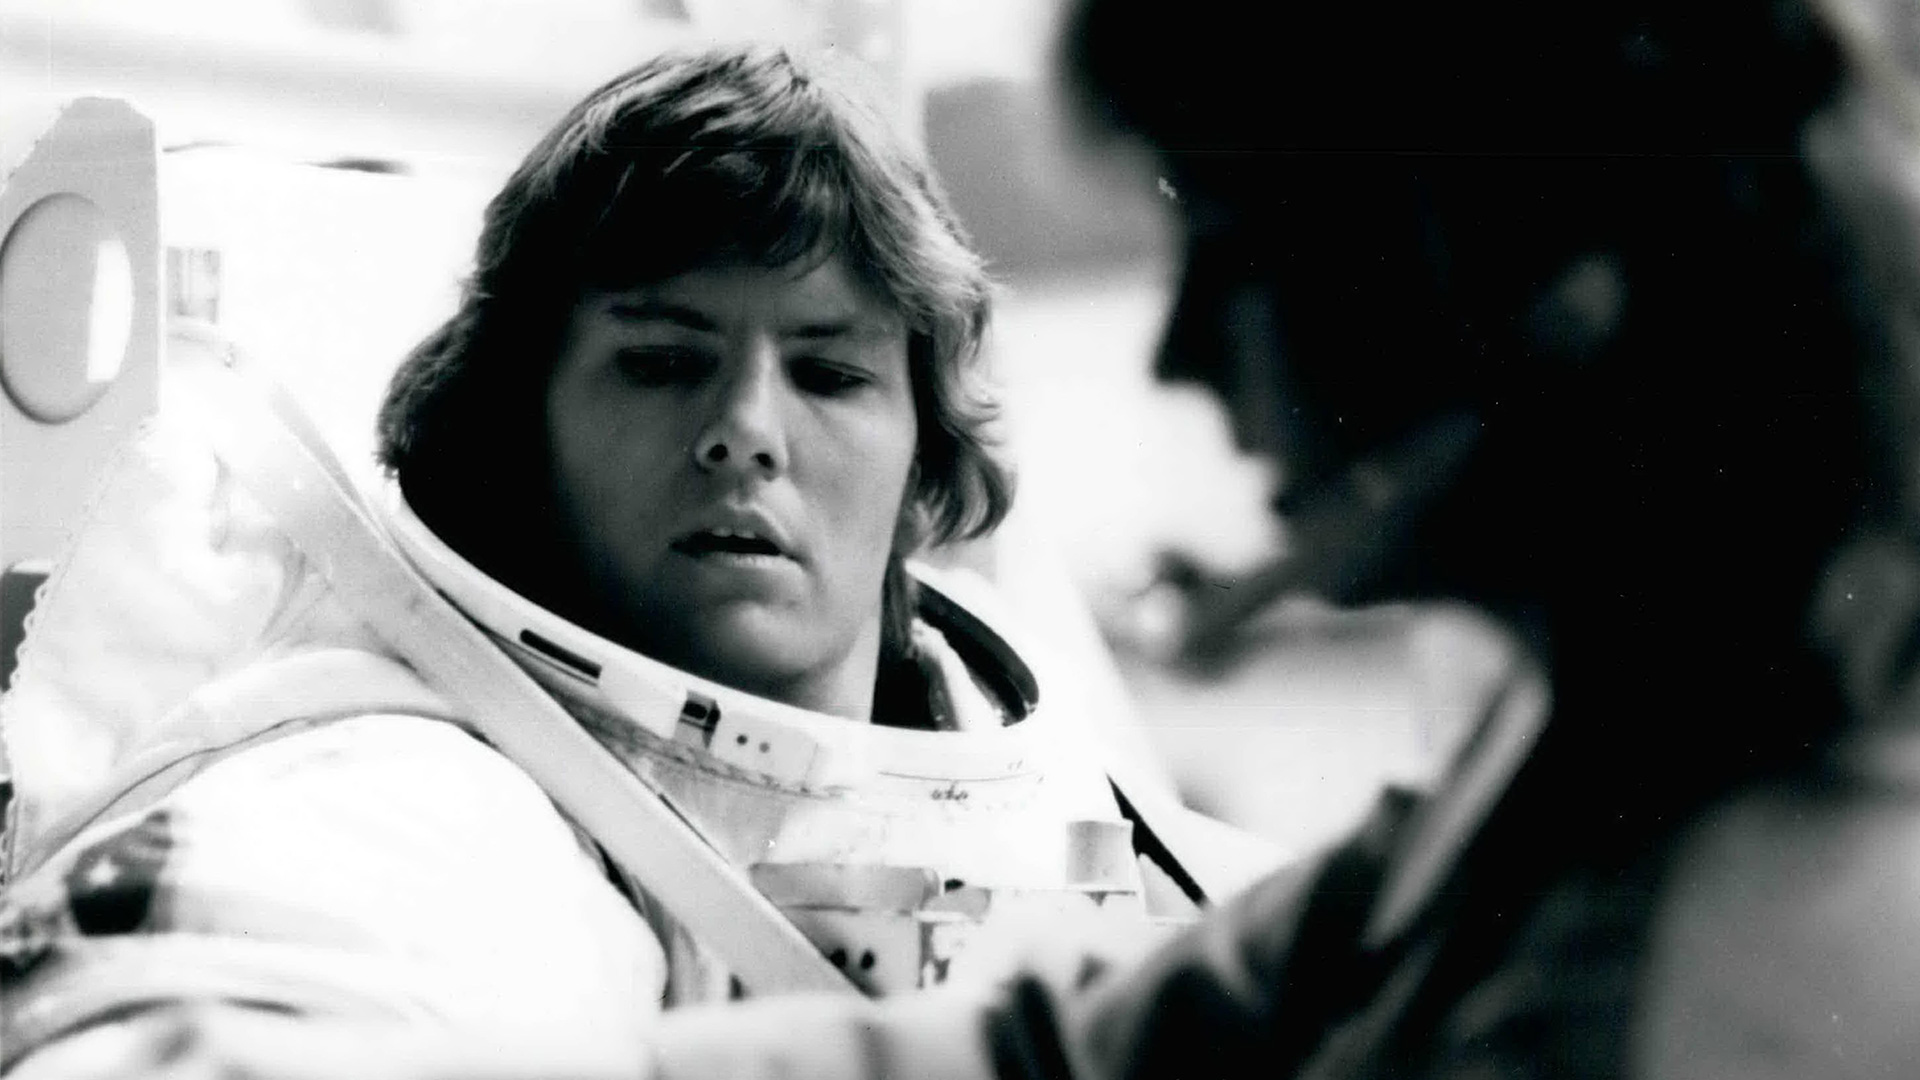 October 11, 1984: Kathryn Sullivan Was the First American Woman to Perform a Spacewalk